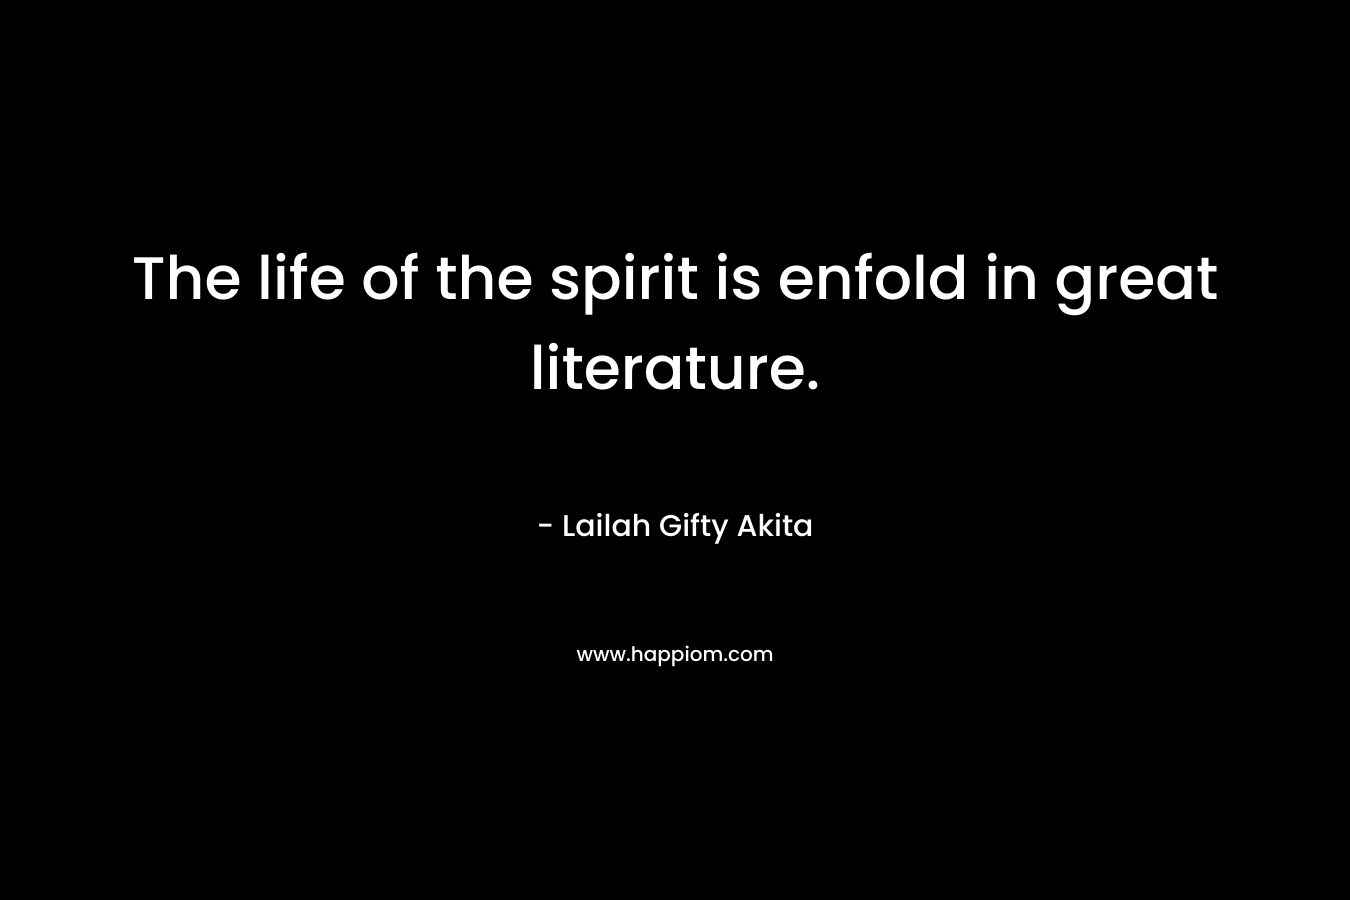 The life of the spirit is enfold in great literature.